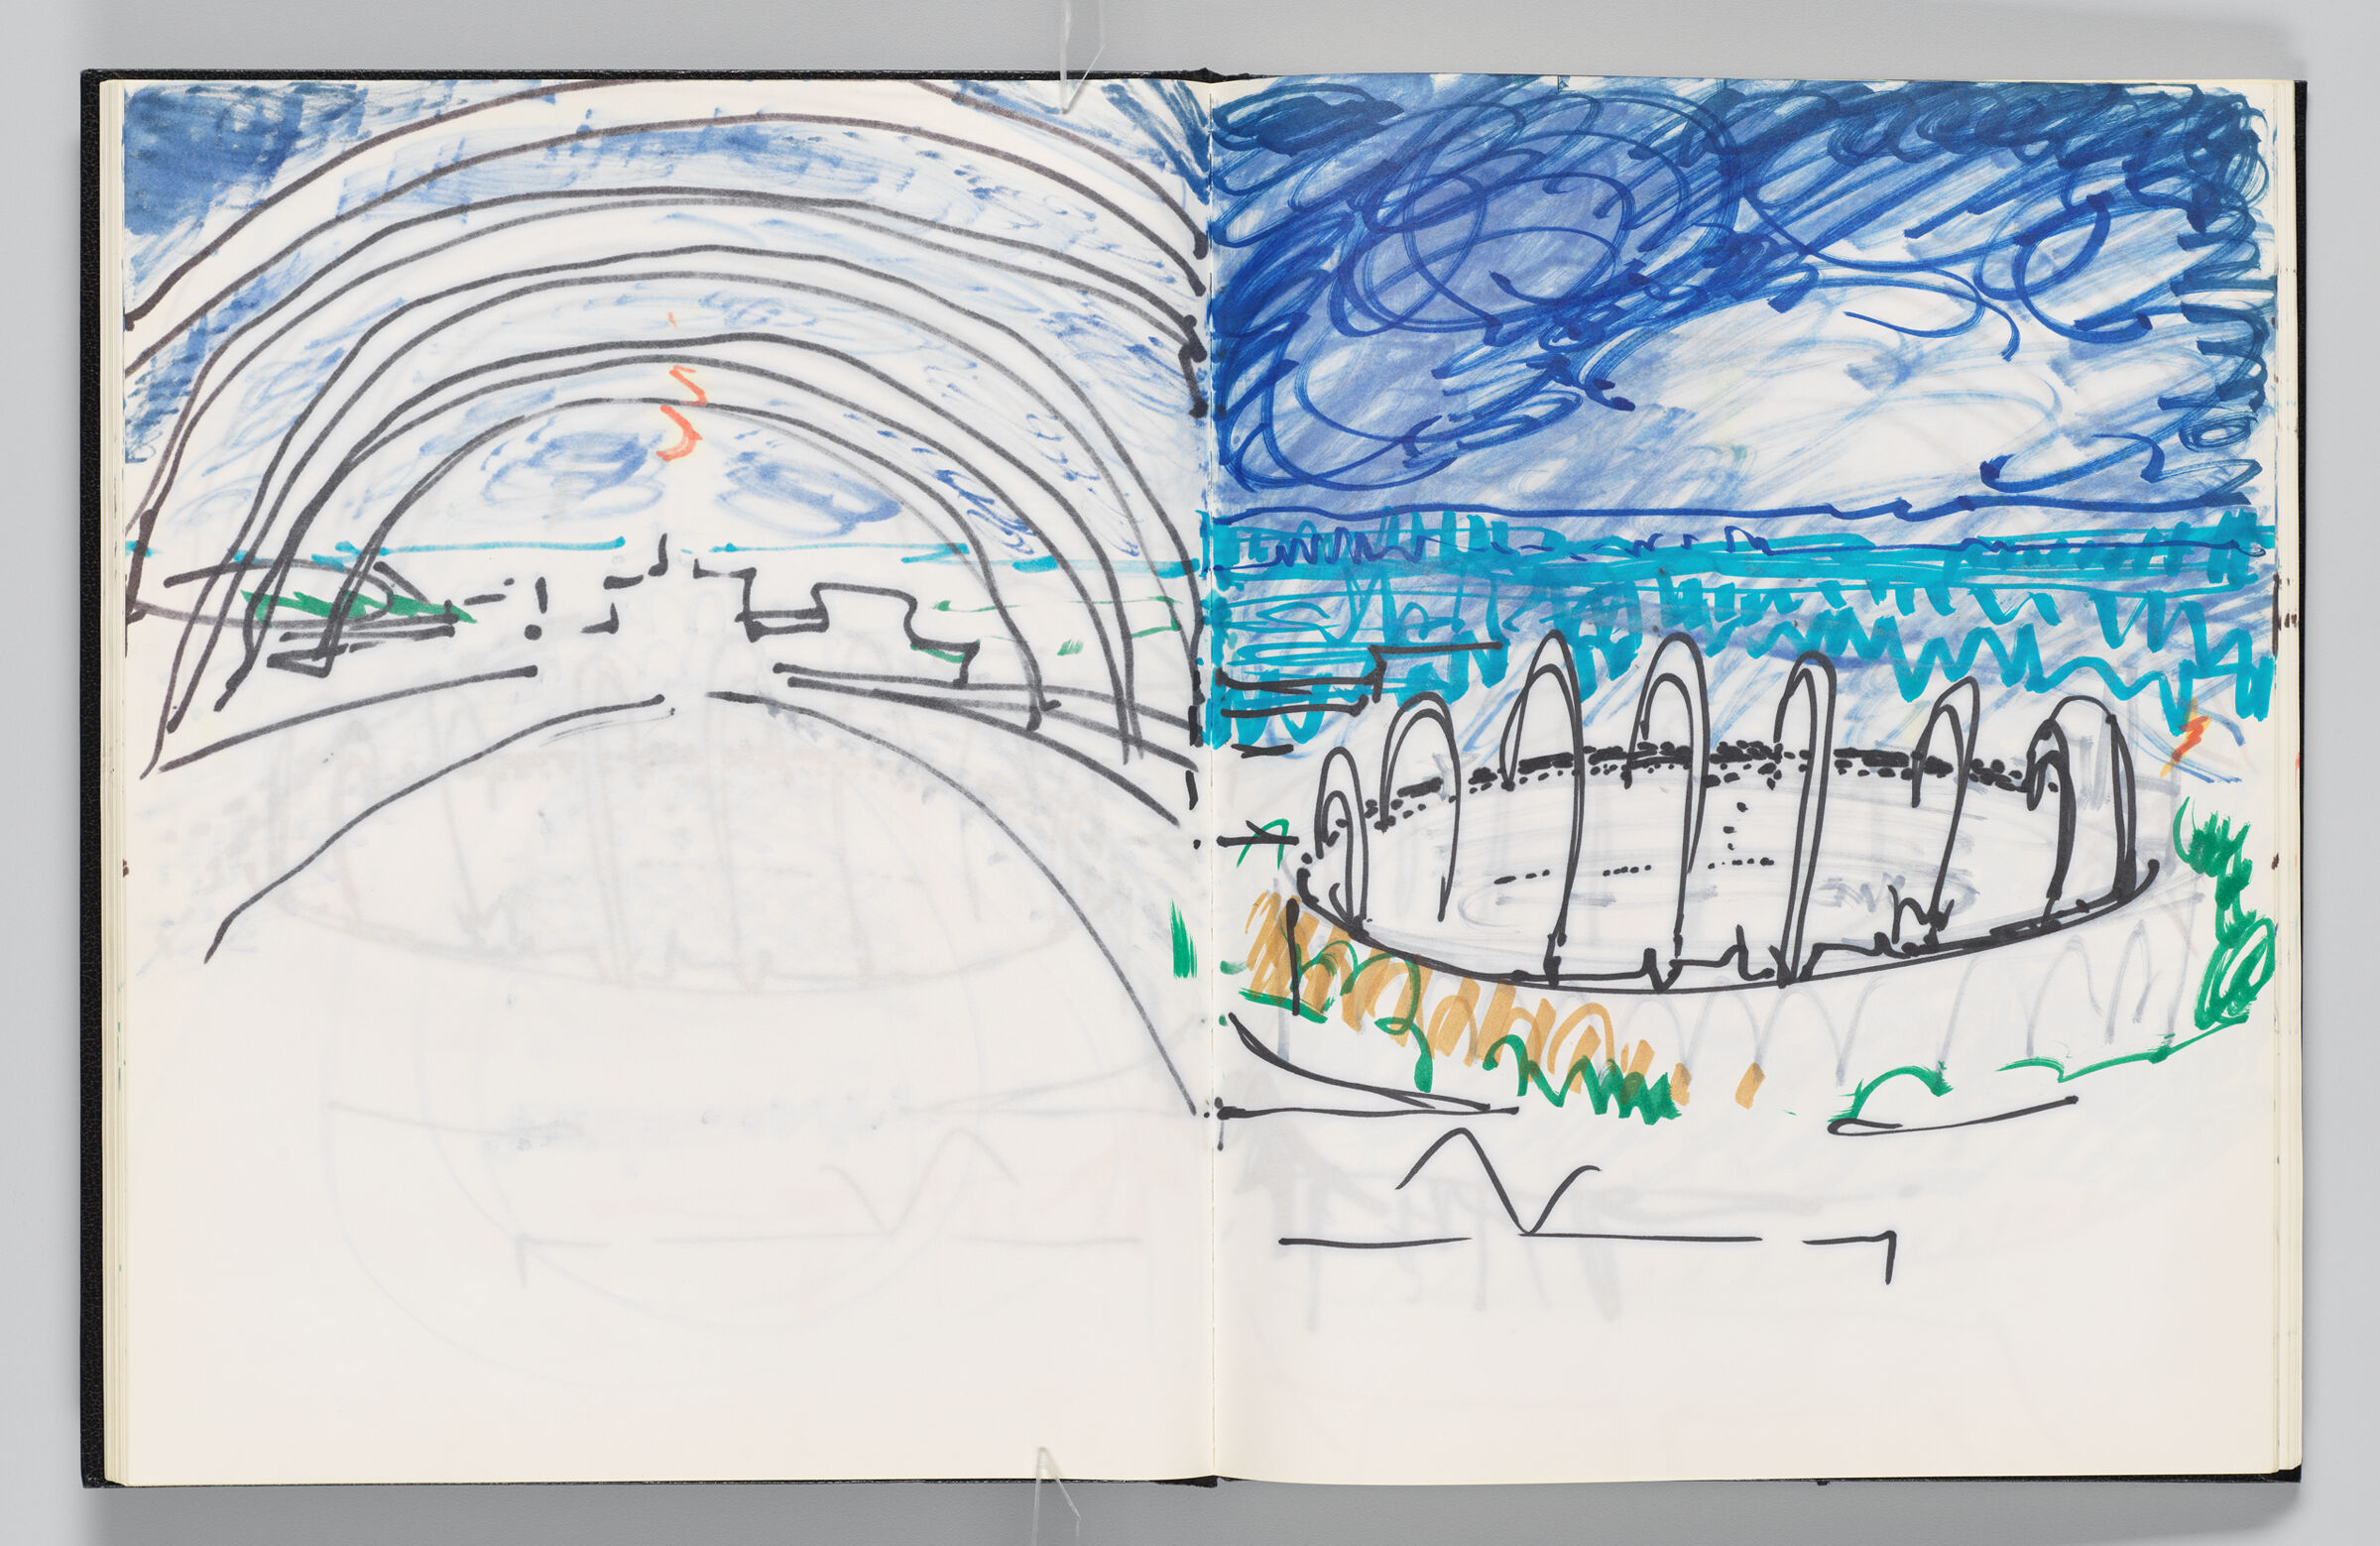 Untitled (Bleed-Through Of Previous Page, Left Page); Untitled (Rainbows Over L.a. Memorial Coliseum, Right Page)